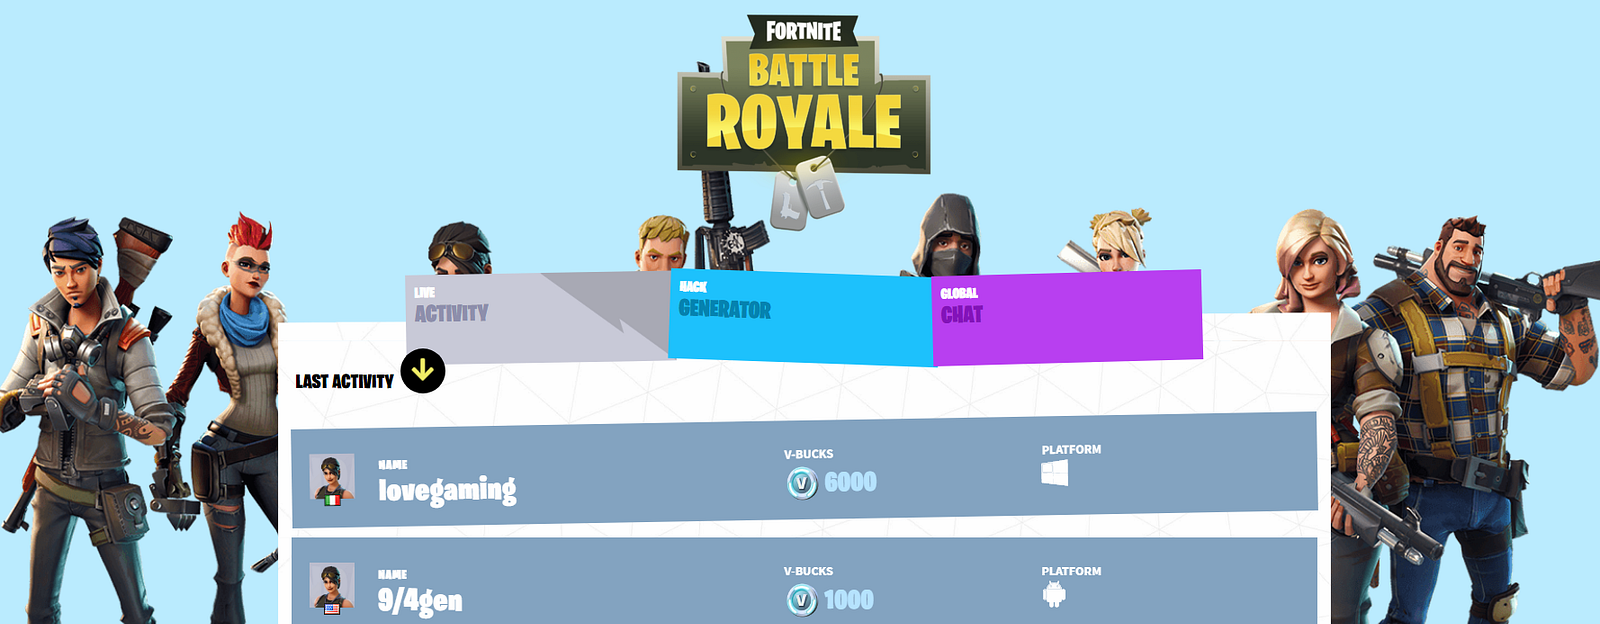 luckily there are loads on how to hack fortnite you can also find hints and tips if you are a serious player - fortnite global hack